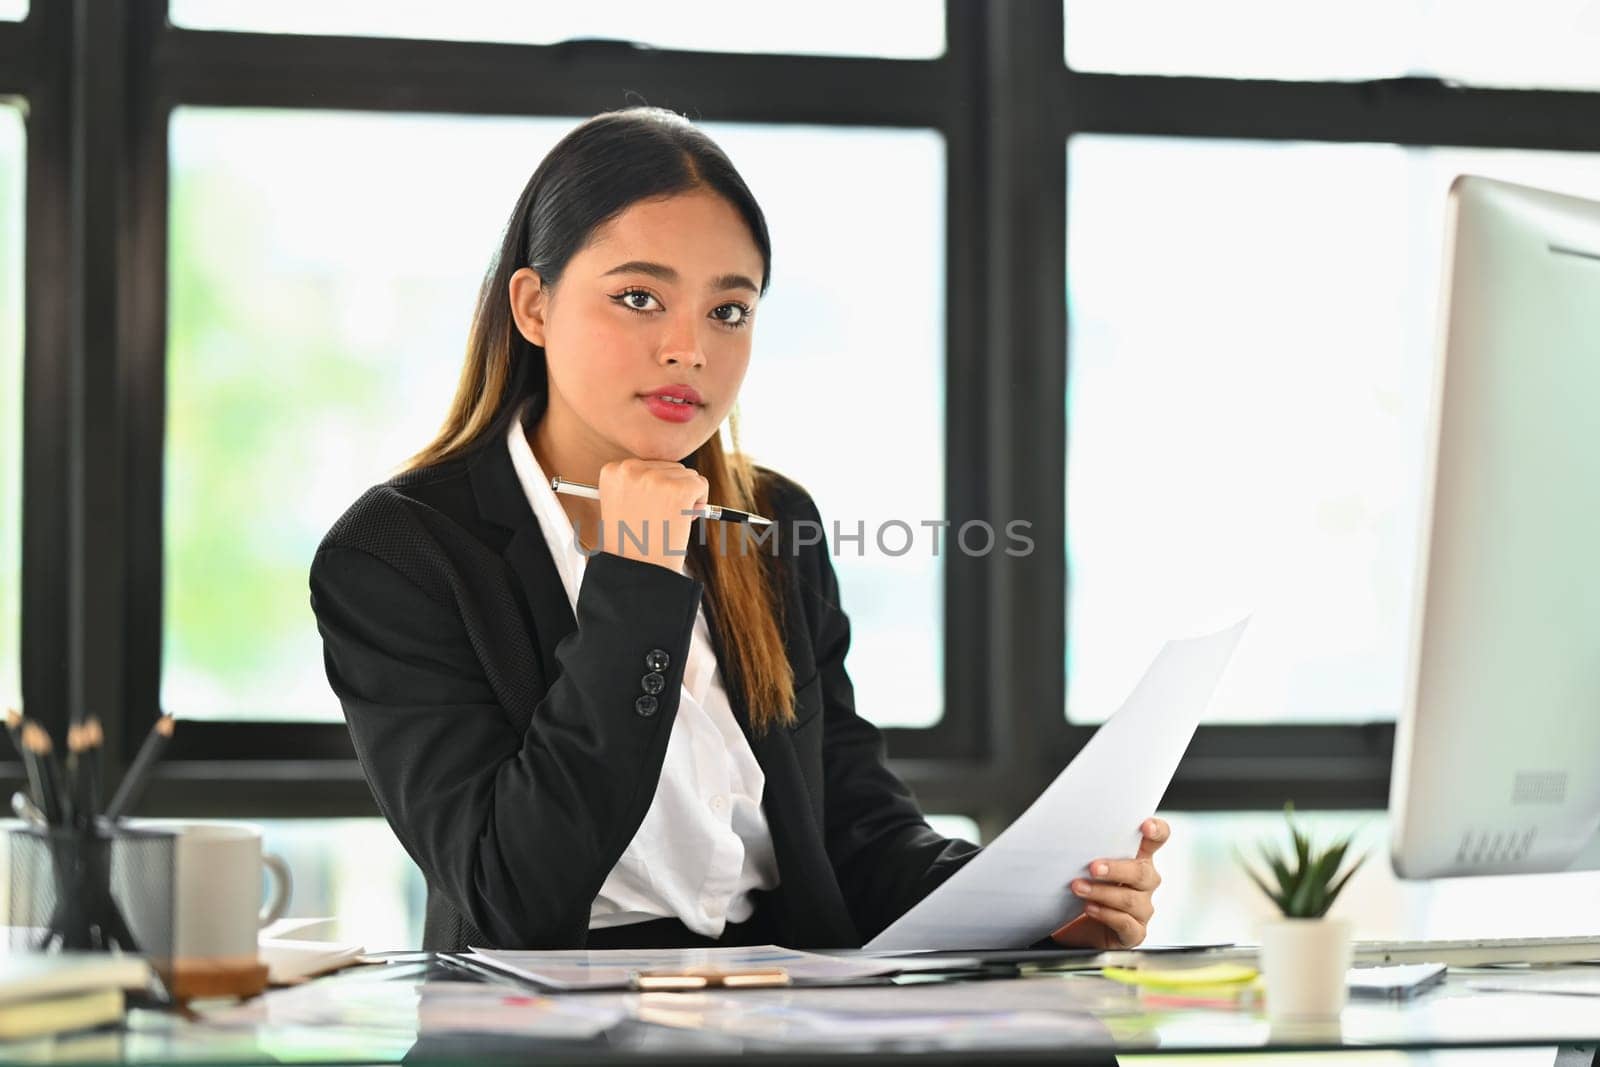 Professional asian female company manage wearing suit sitting at desk and looking at camera.